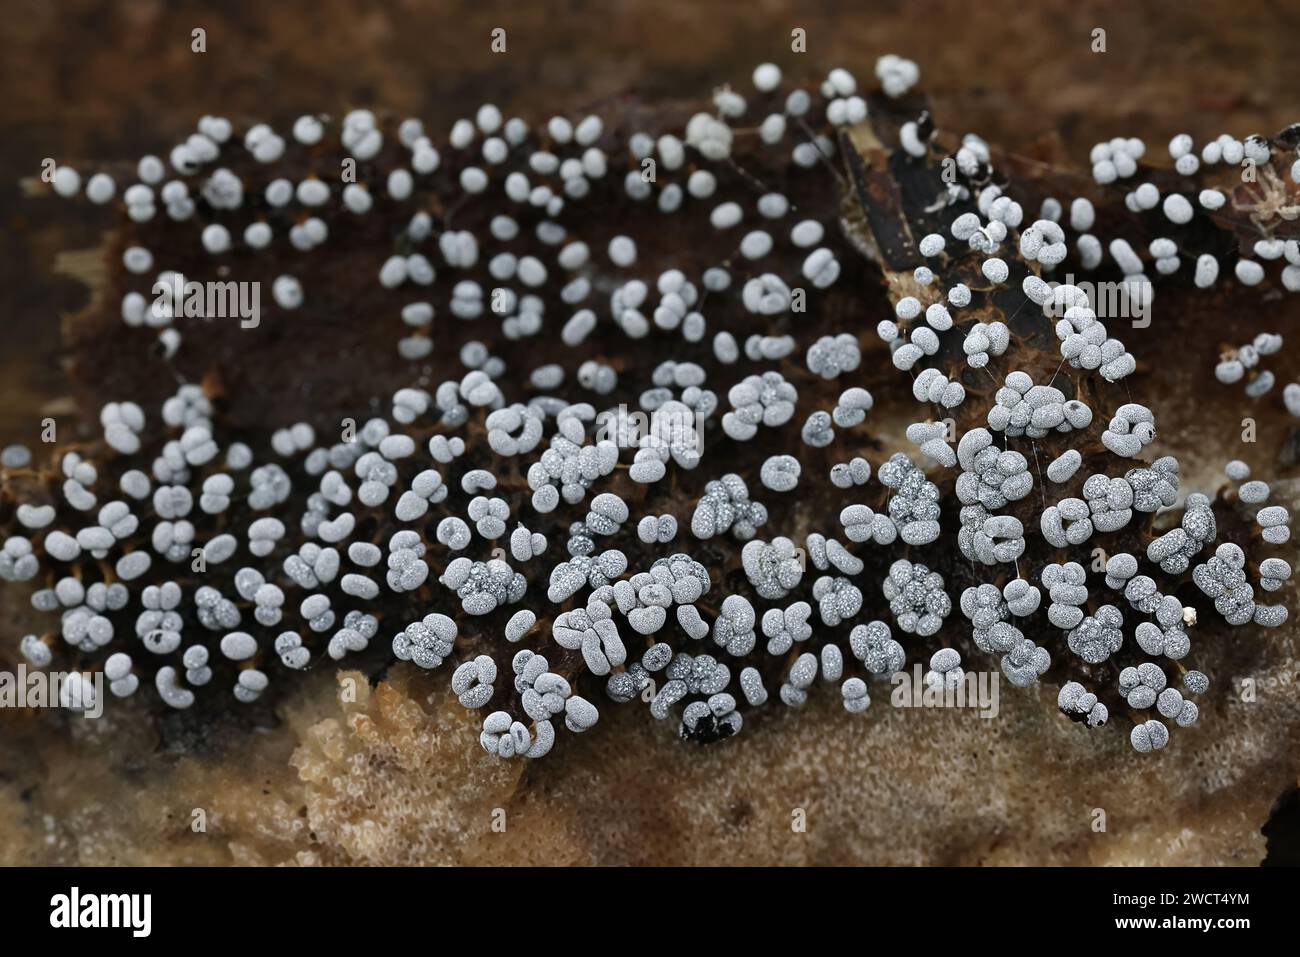 Physarum straminipes, slime mold from Finland, no common English name Stock Photo